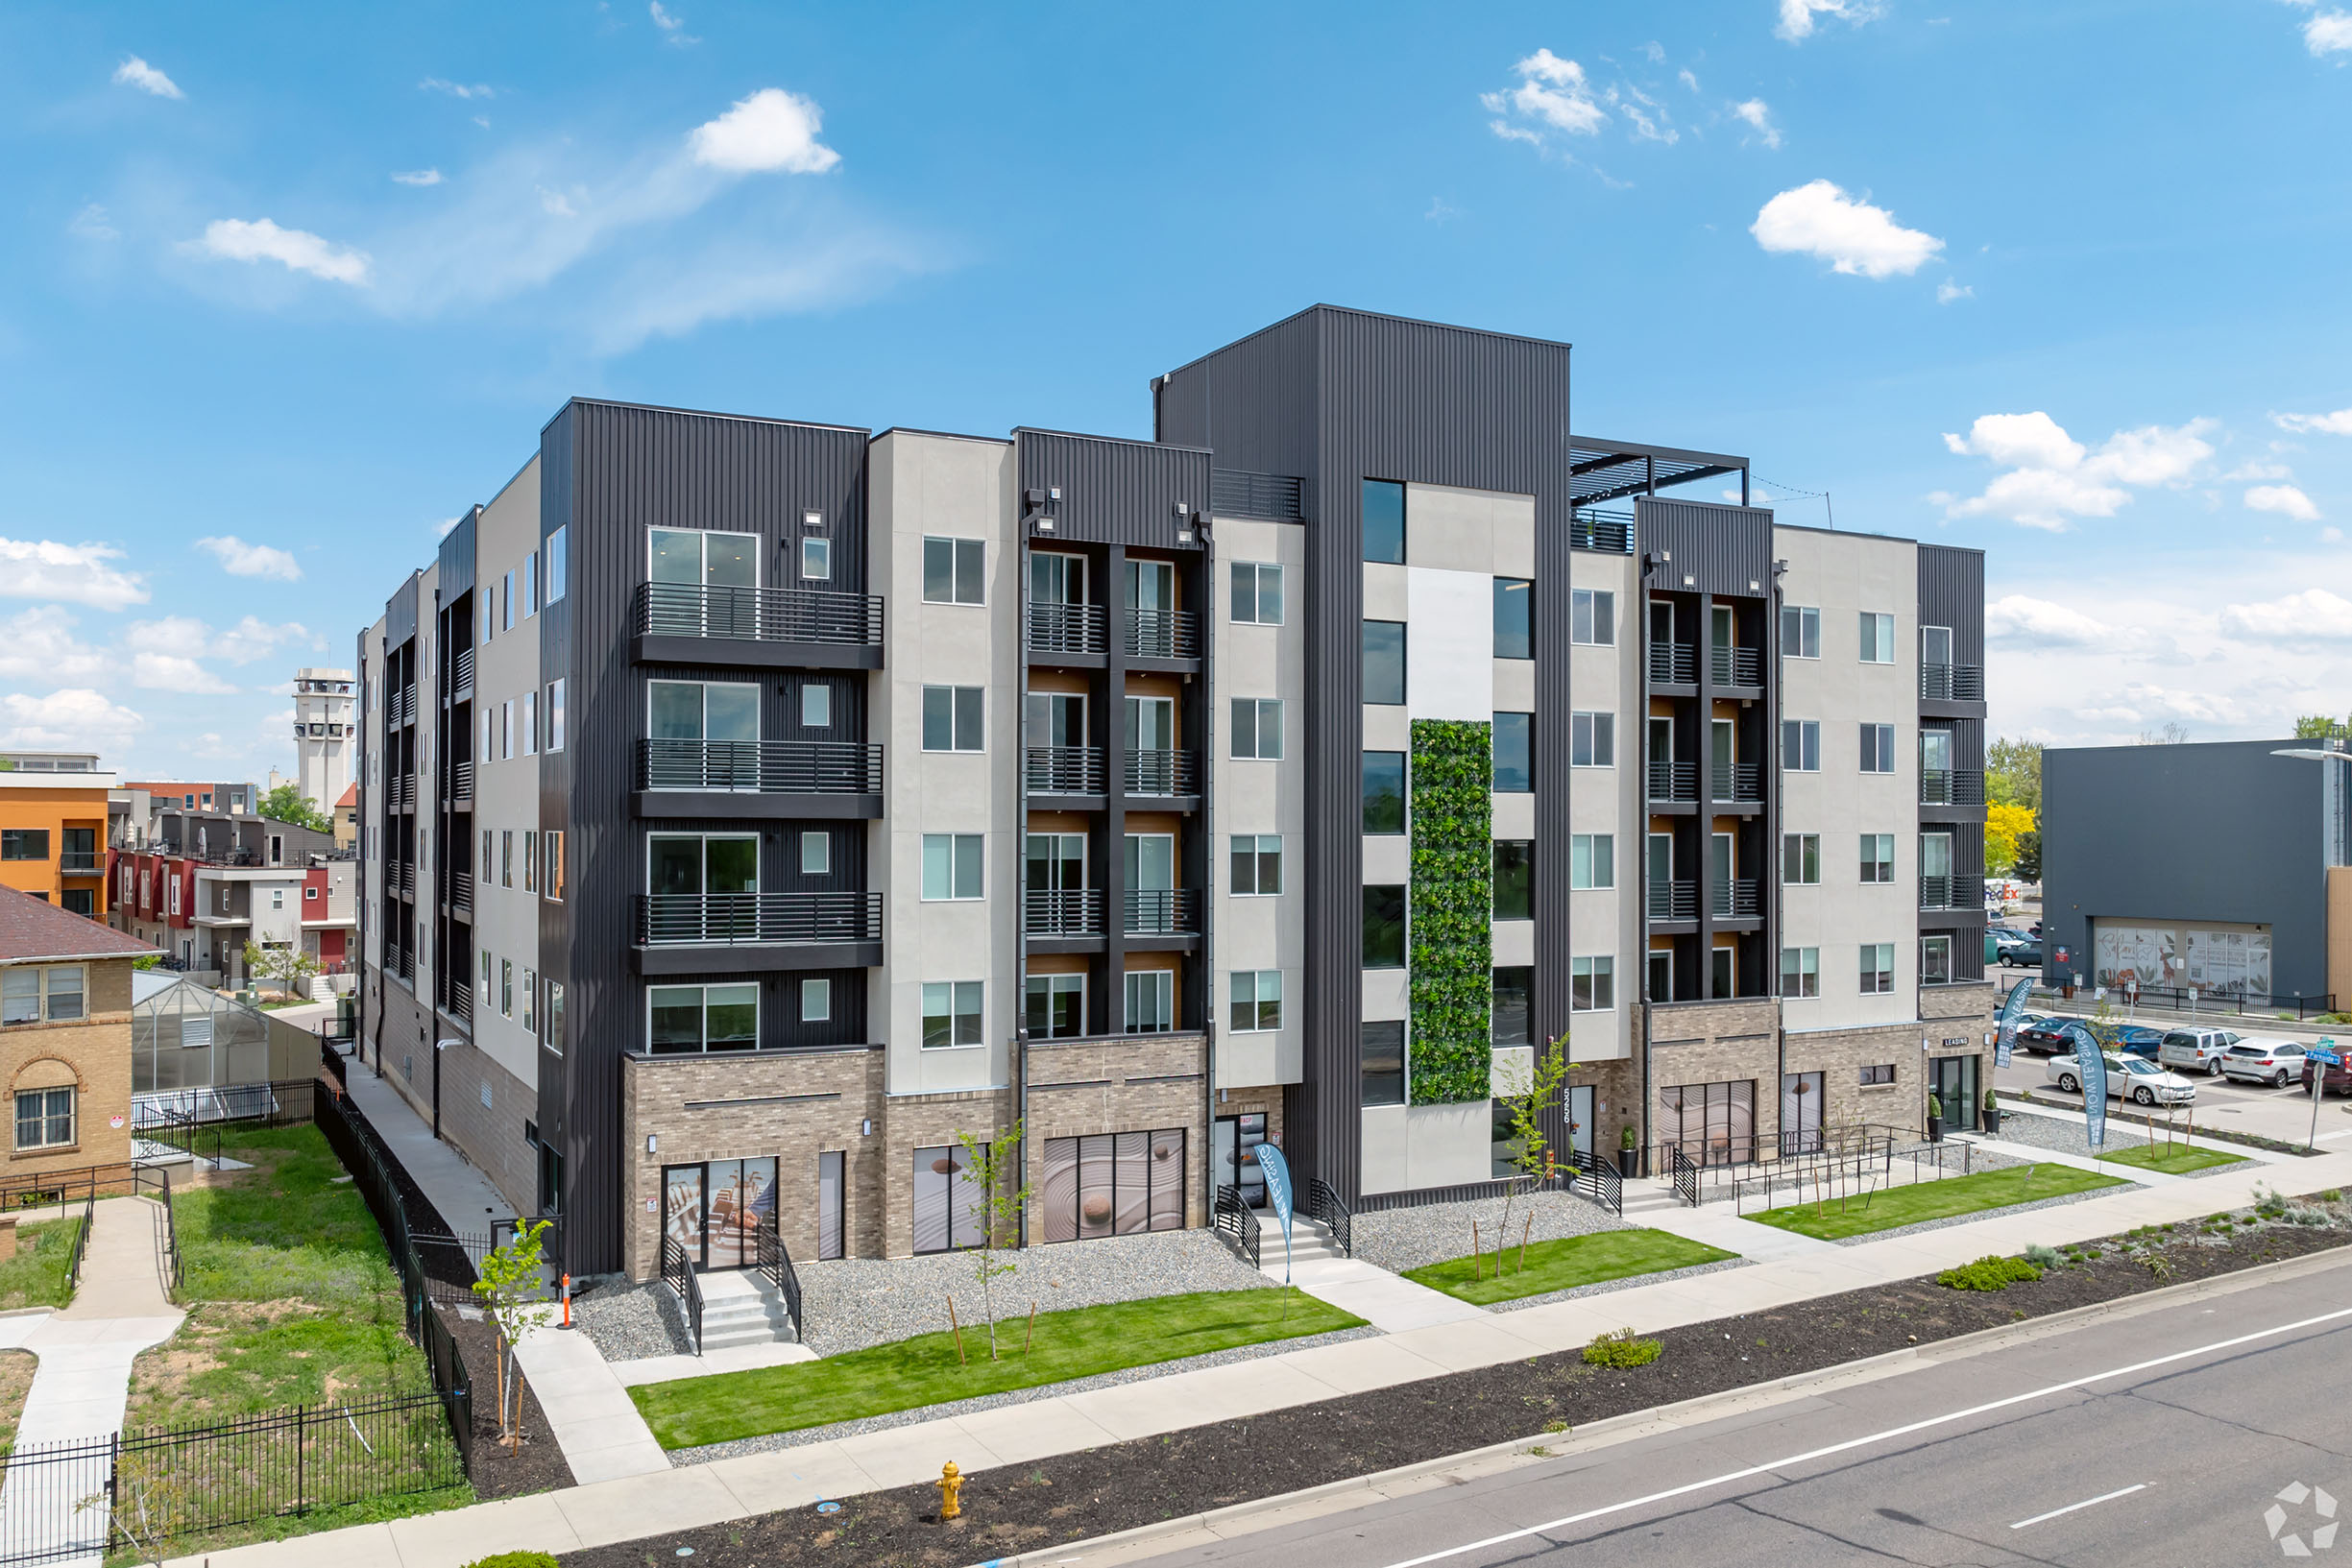 Enso Zen Apartments -#1 of Top Single Family Home builders & Multi-family residential, mixed-Use & commercial real estate developers in Denver, Colorado - Weins Development Group.